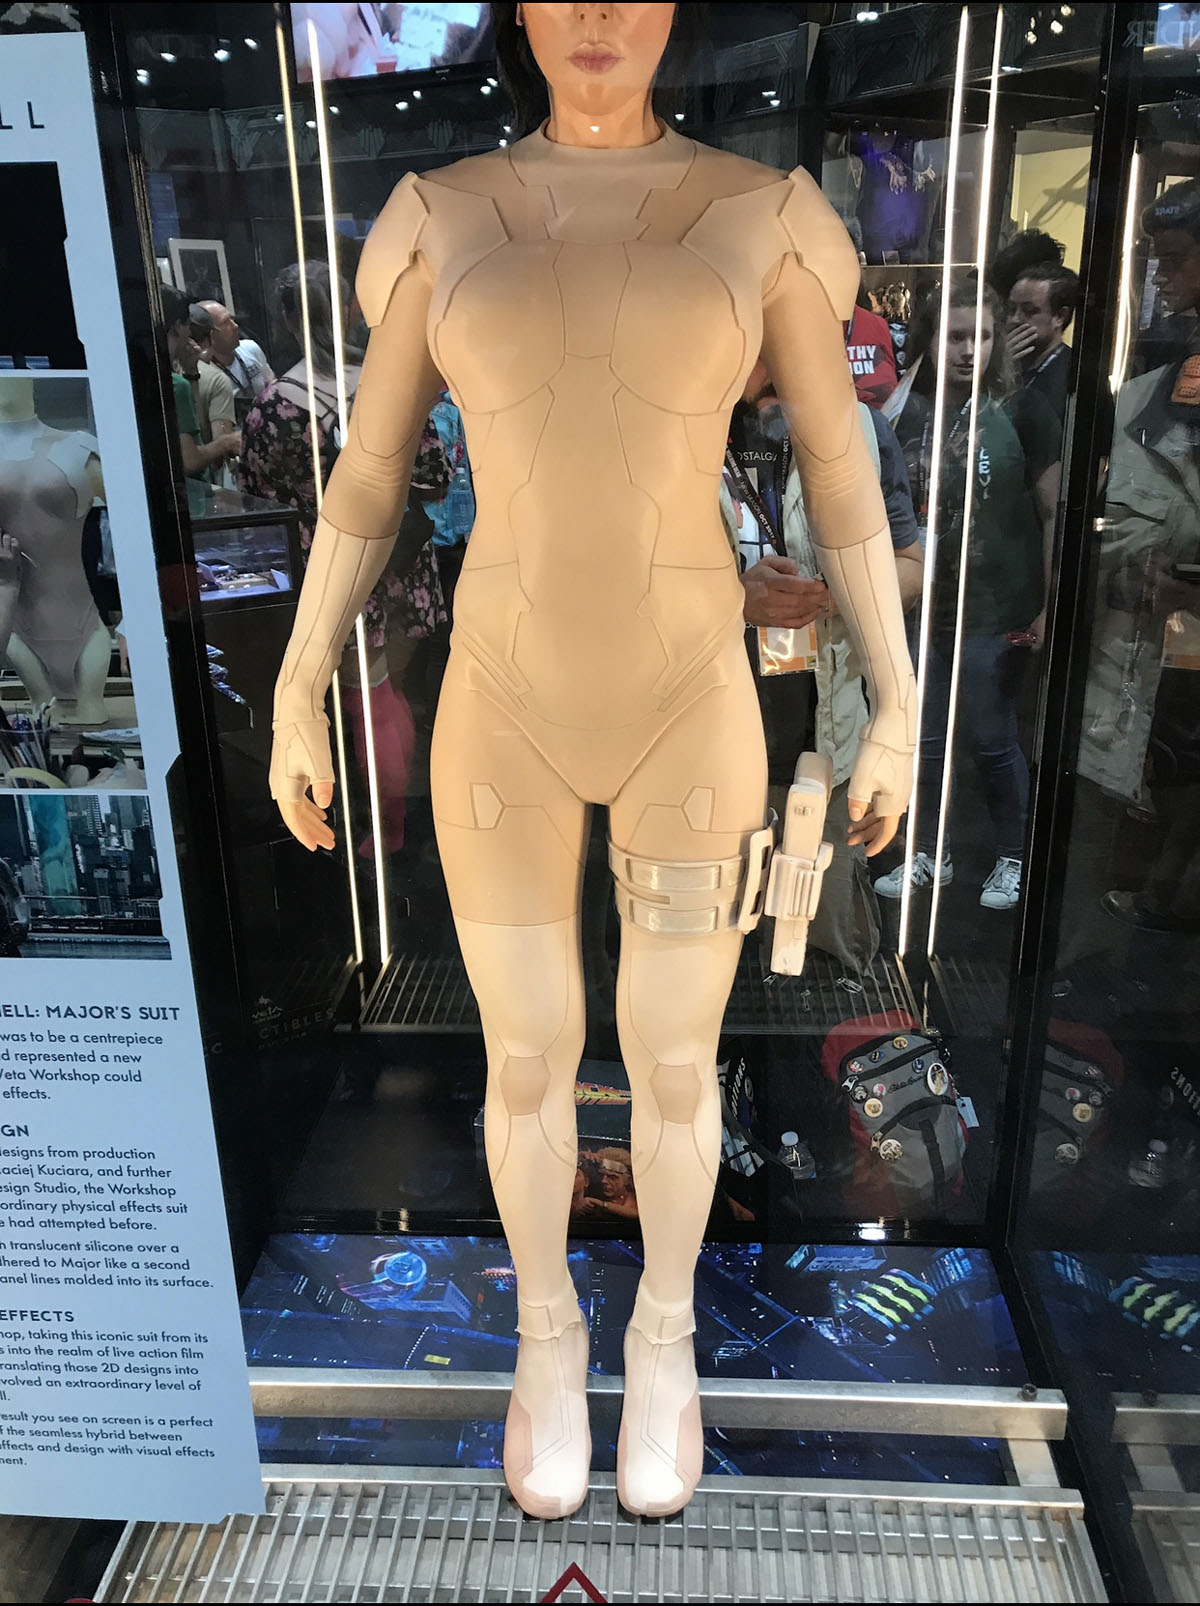 Scarlet Johansson's Ghost in the Shell Costume on Display